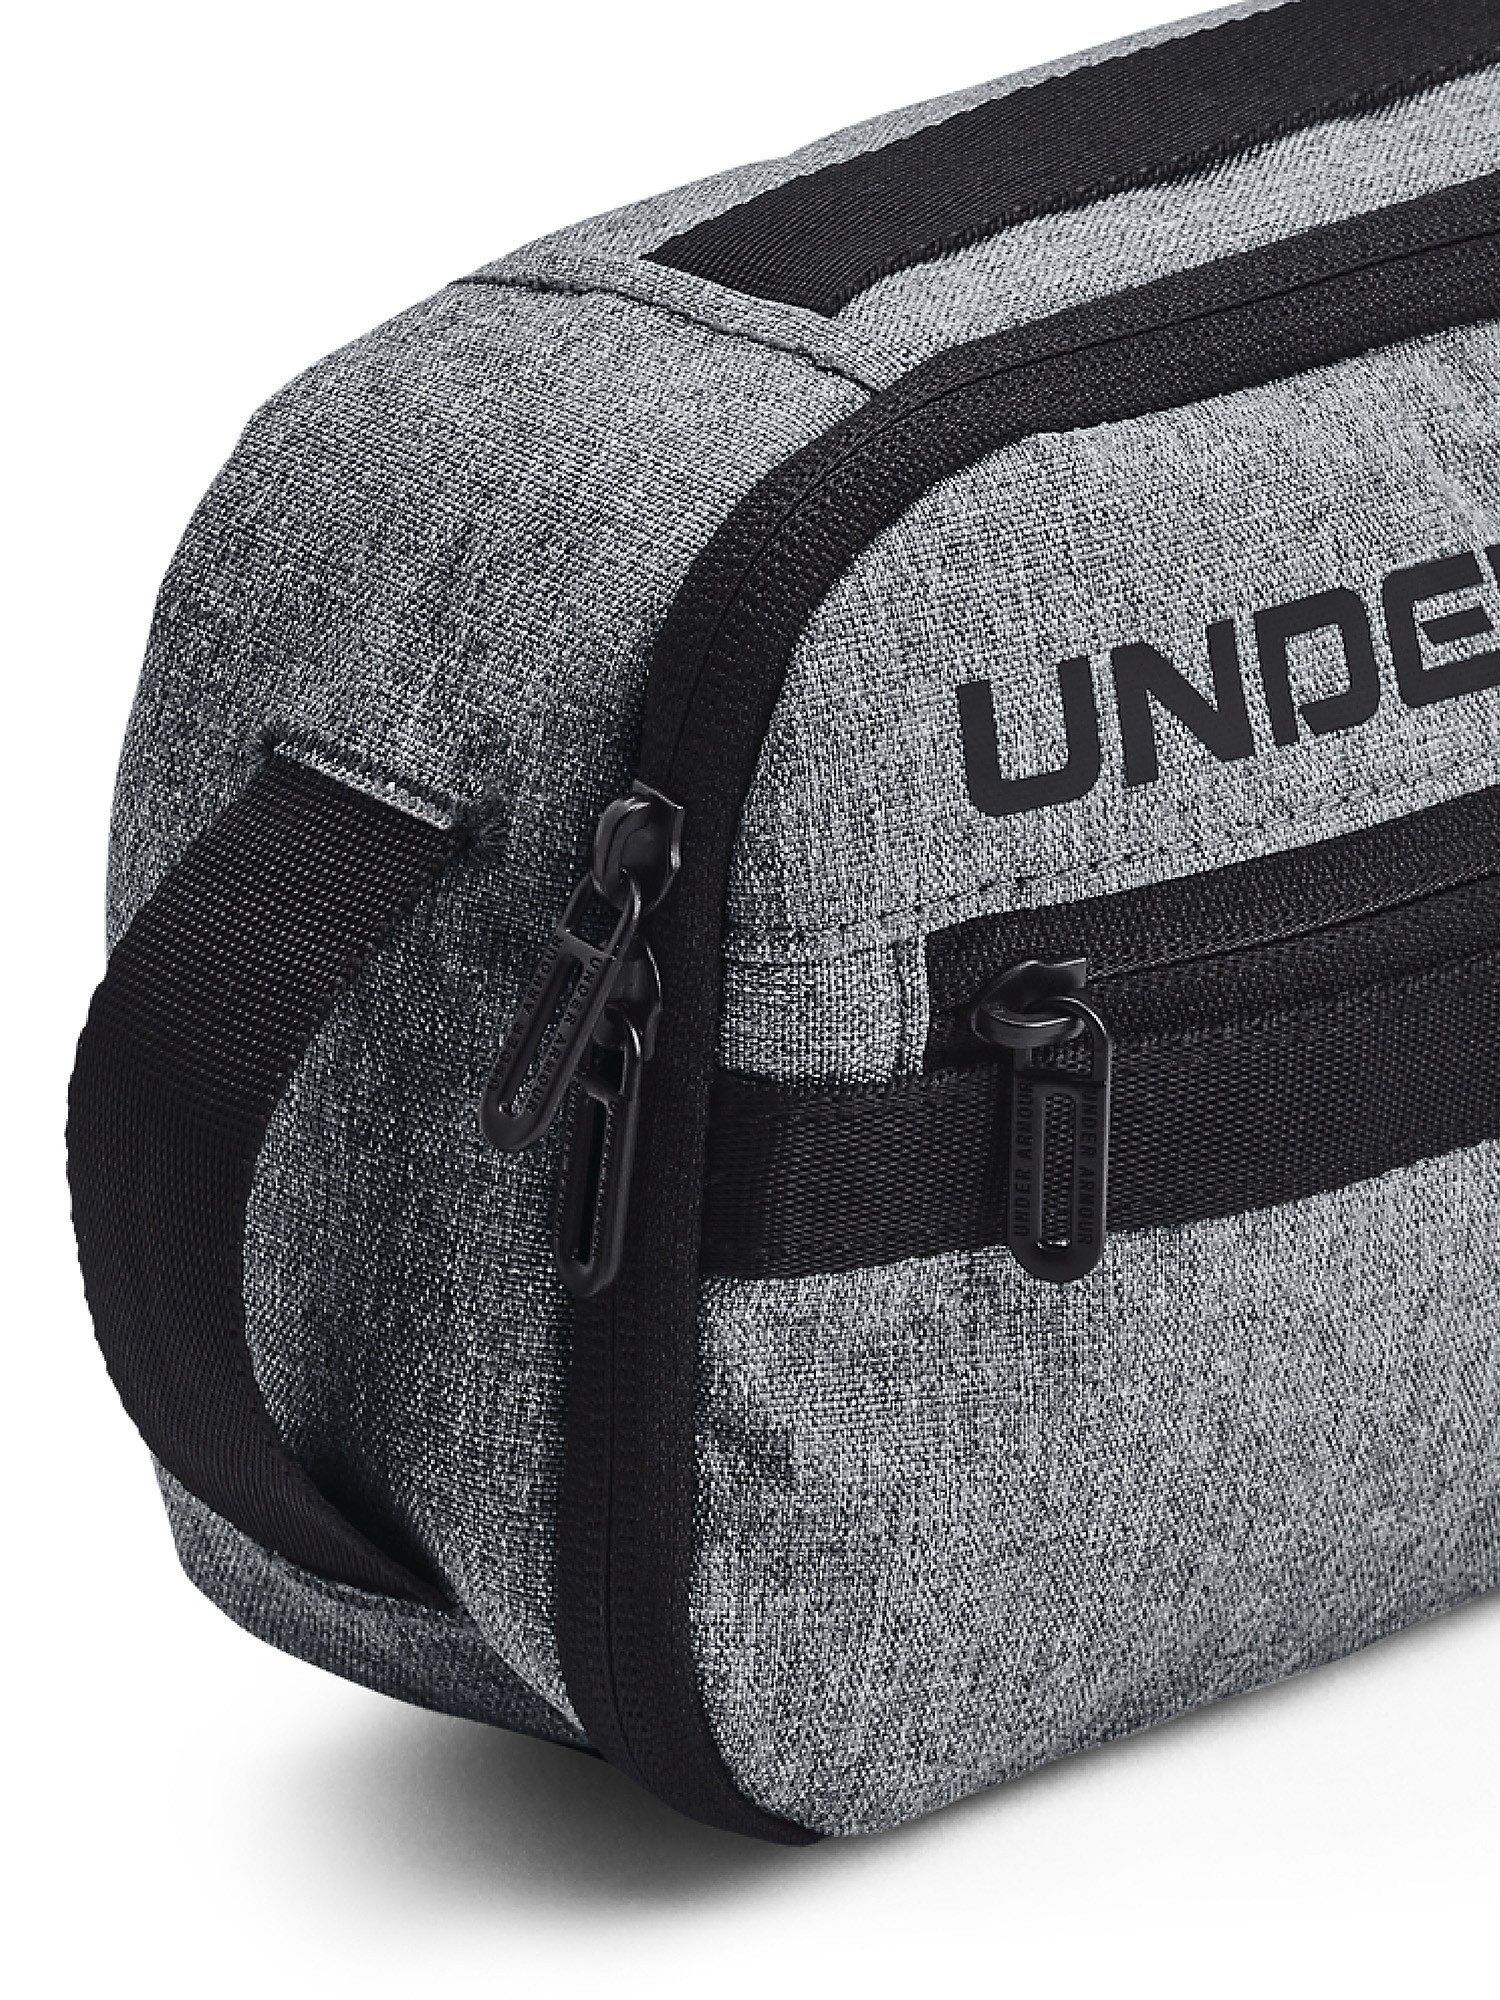 Under Armour - UA Contain Travel Travel Kit, Grey, large image number 2